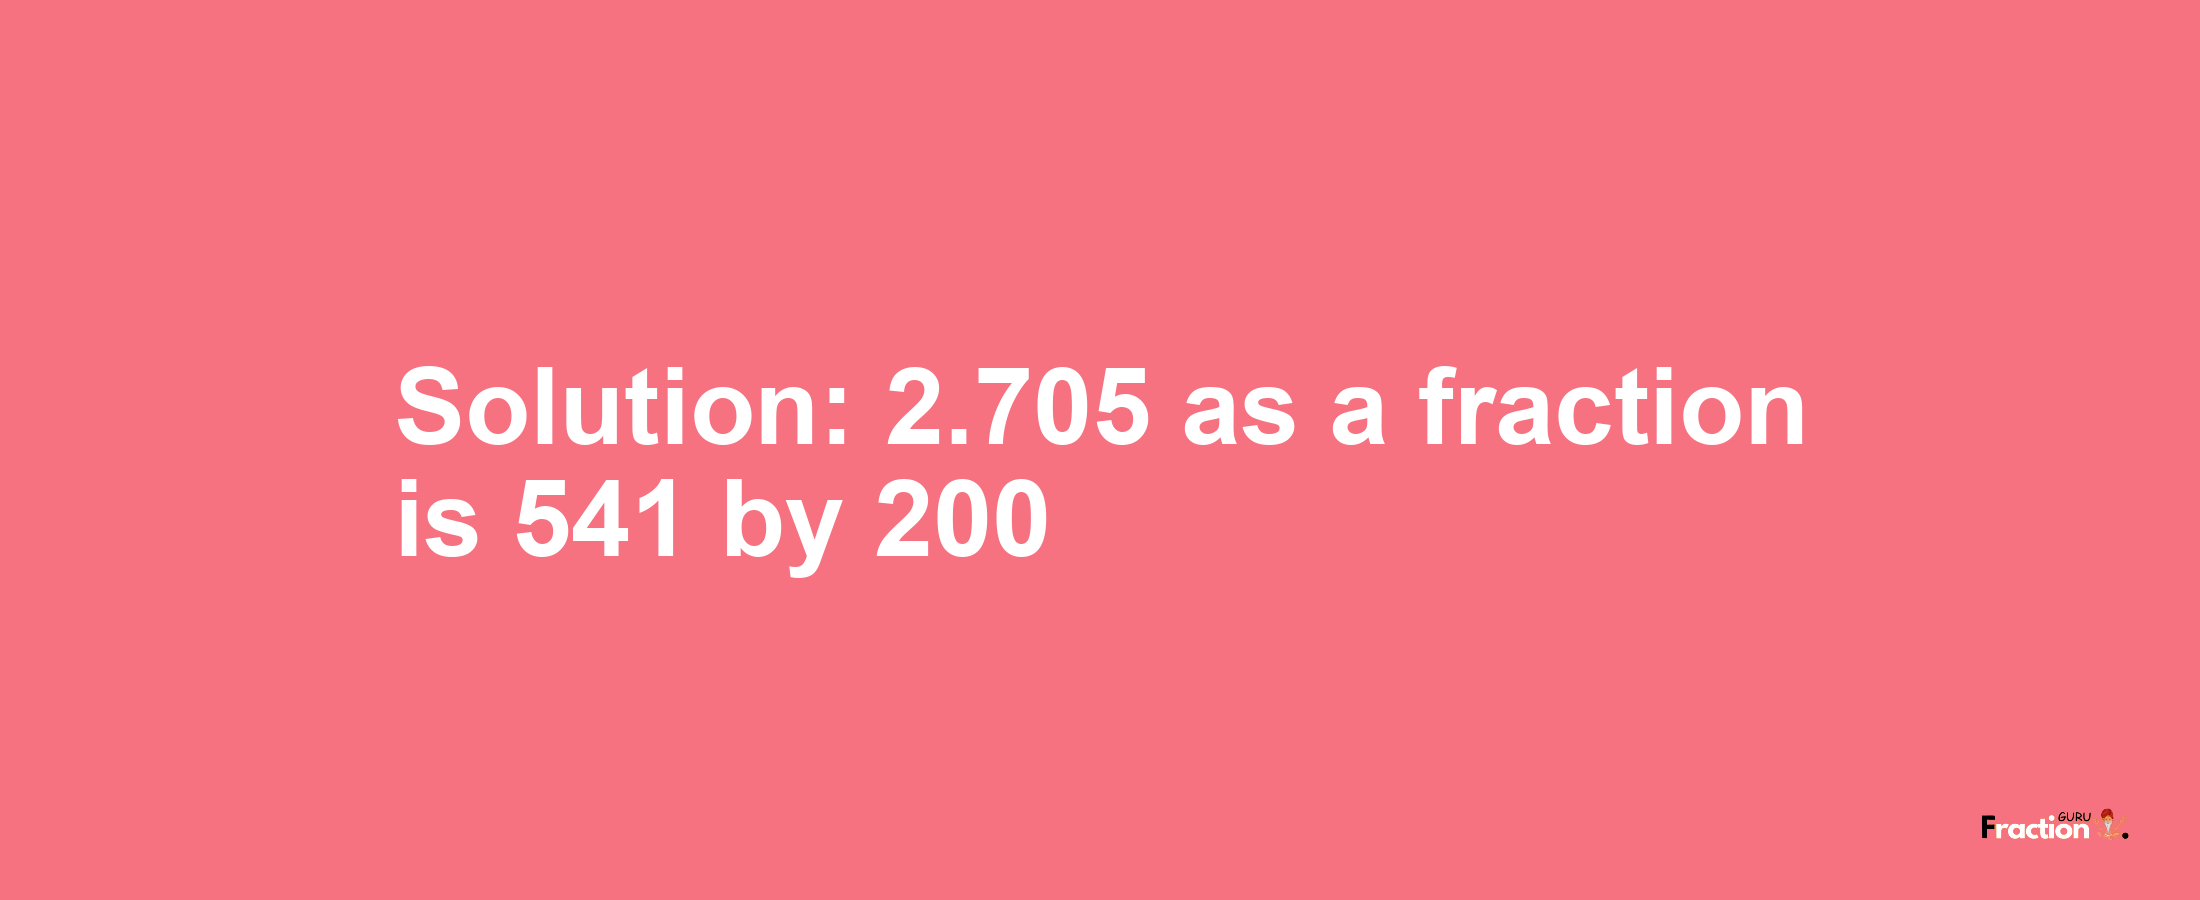 Solution:2.705 as a fraction is 541/200